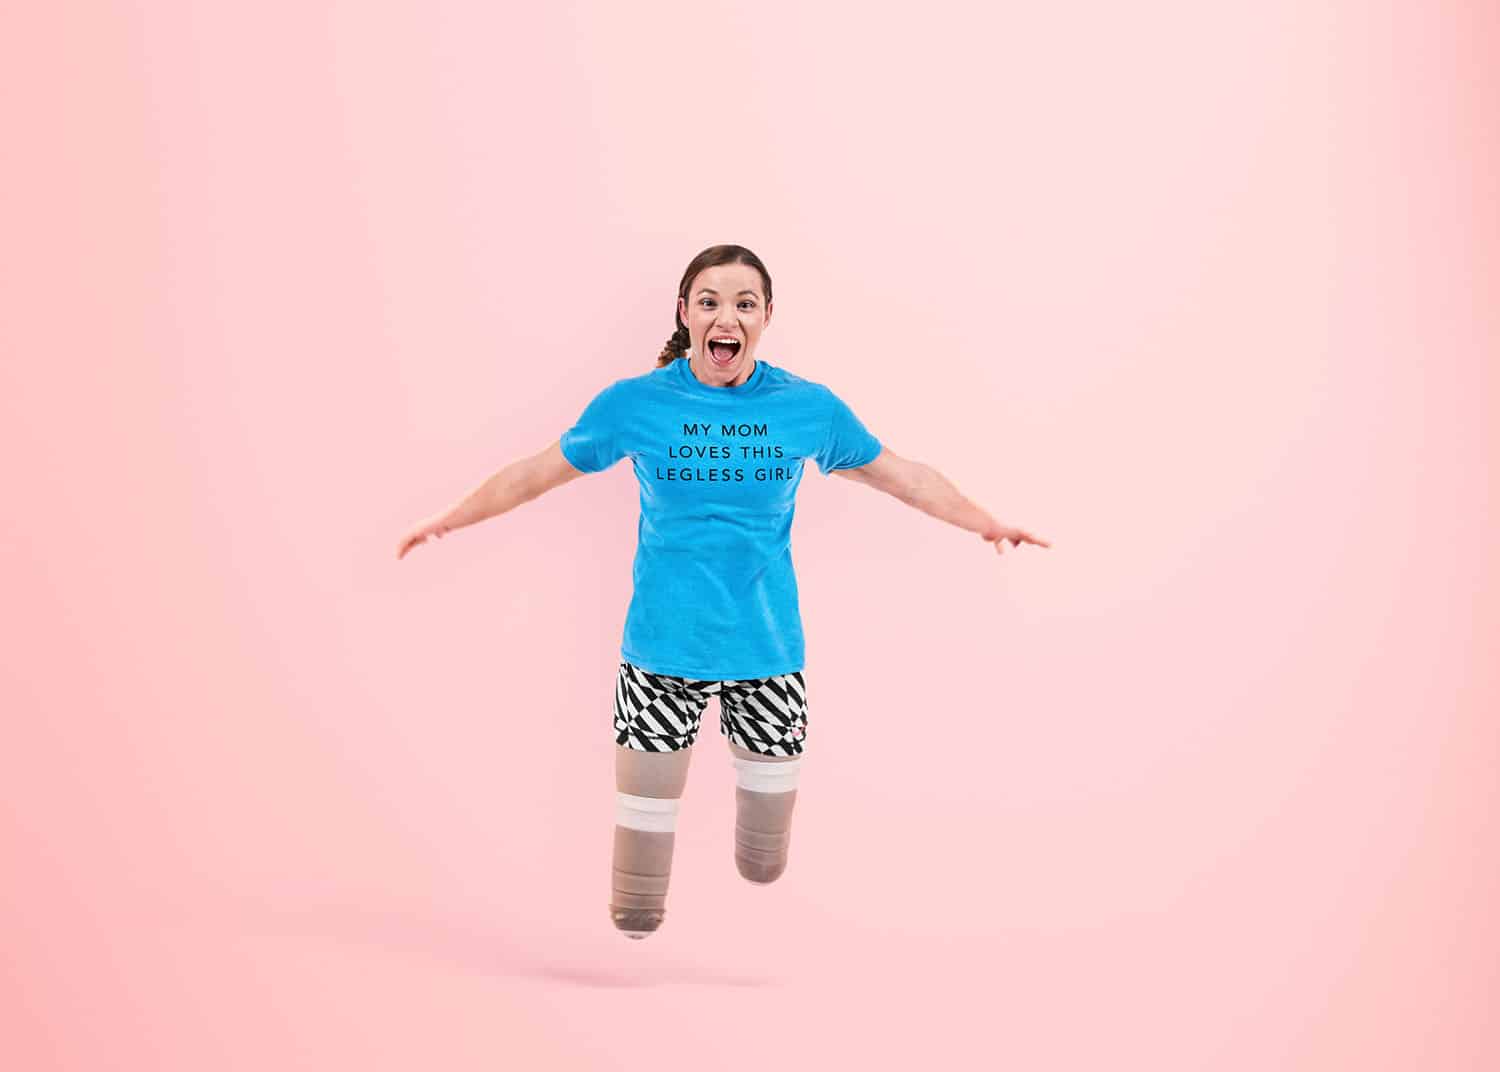 Paralympic gold medalist Oksana Masters leaps without her prosthetics on a pink background wearing a tee-shirt that says "My Mom Loves This Legless Girl."